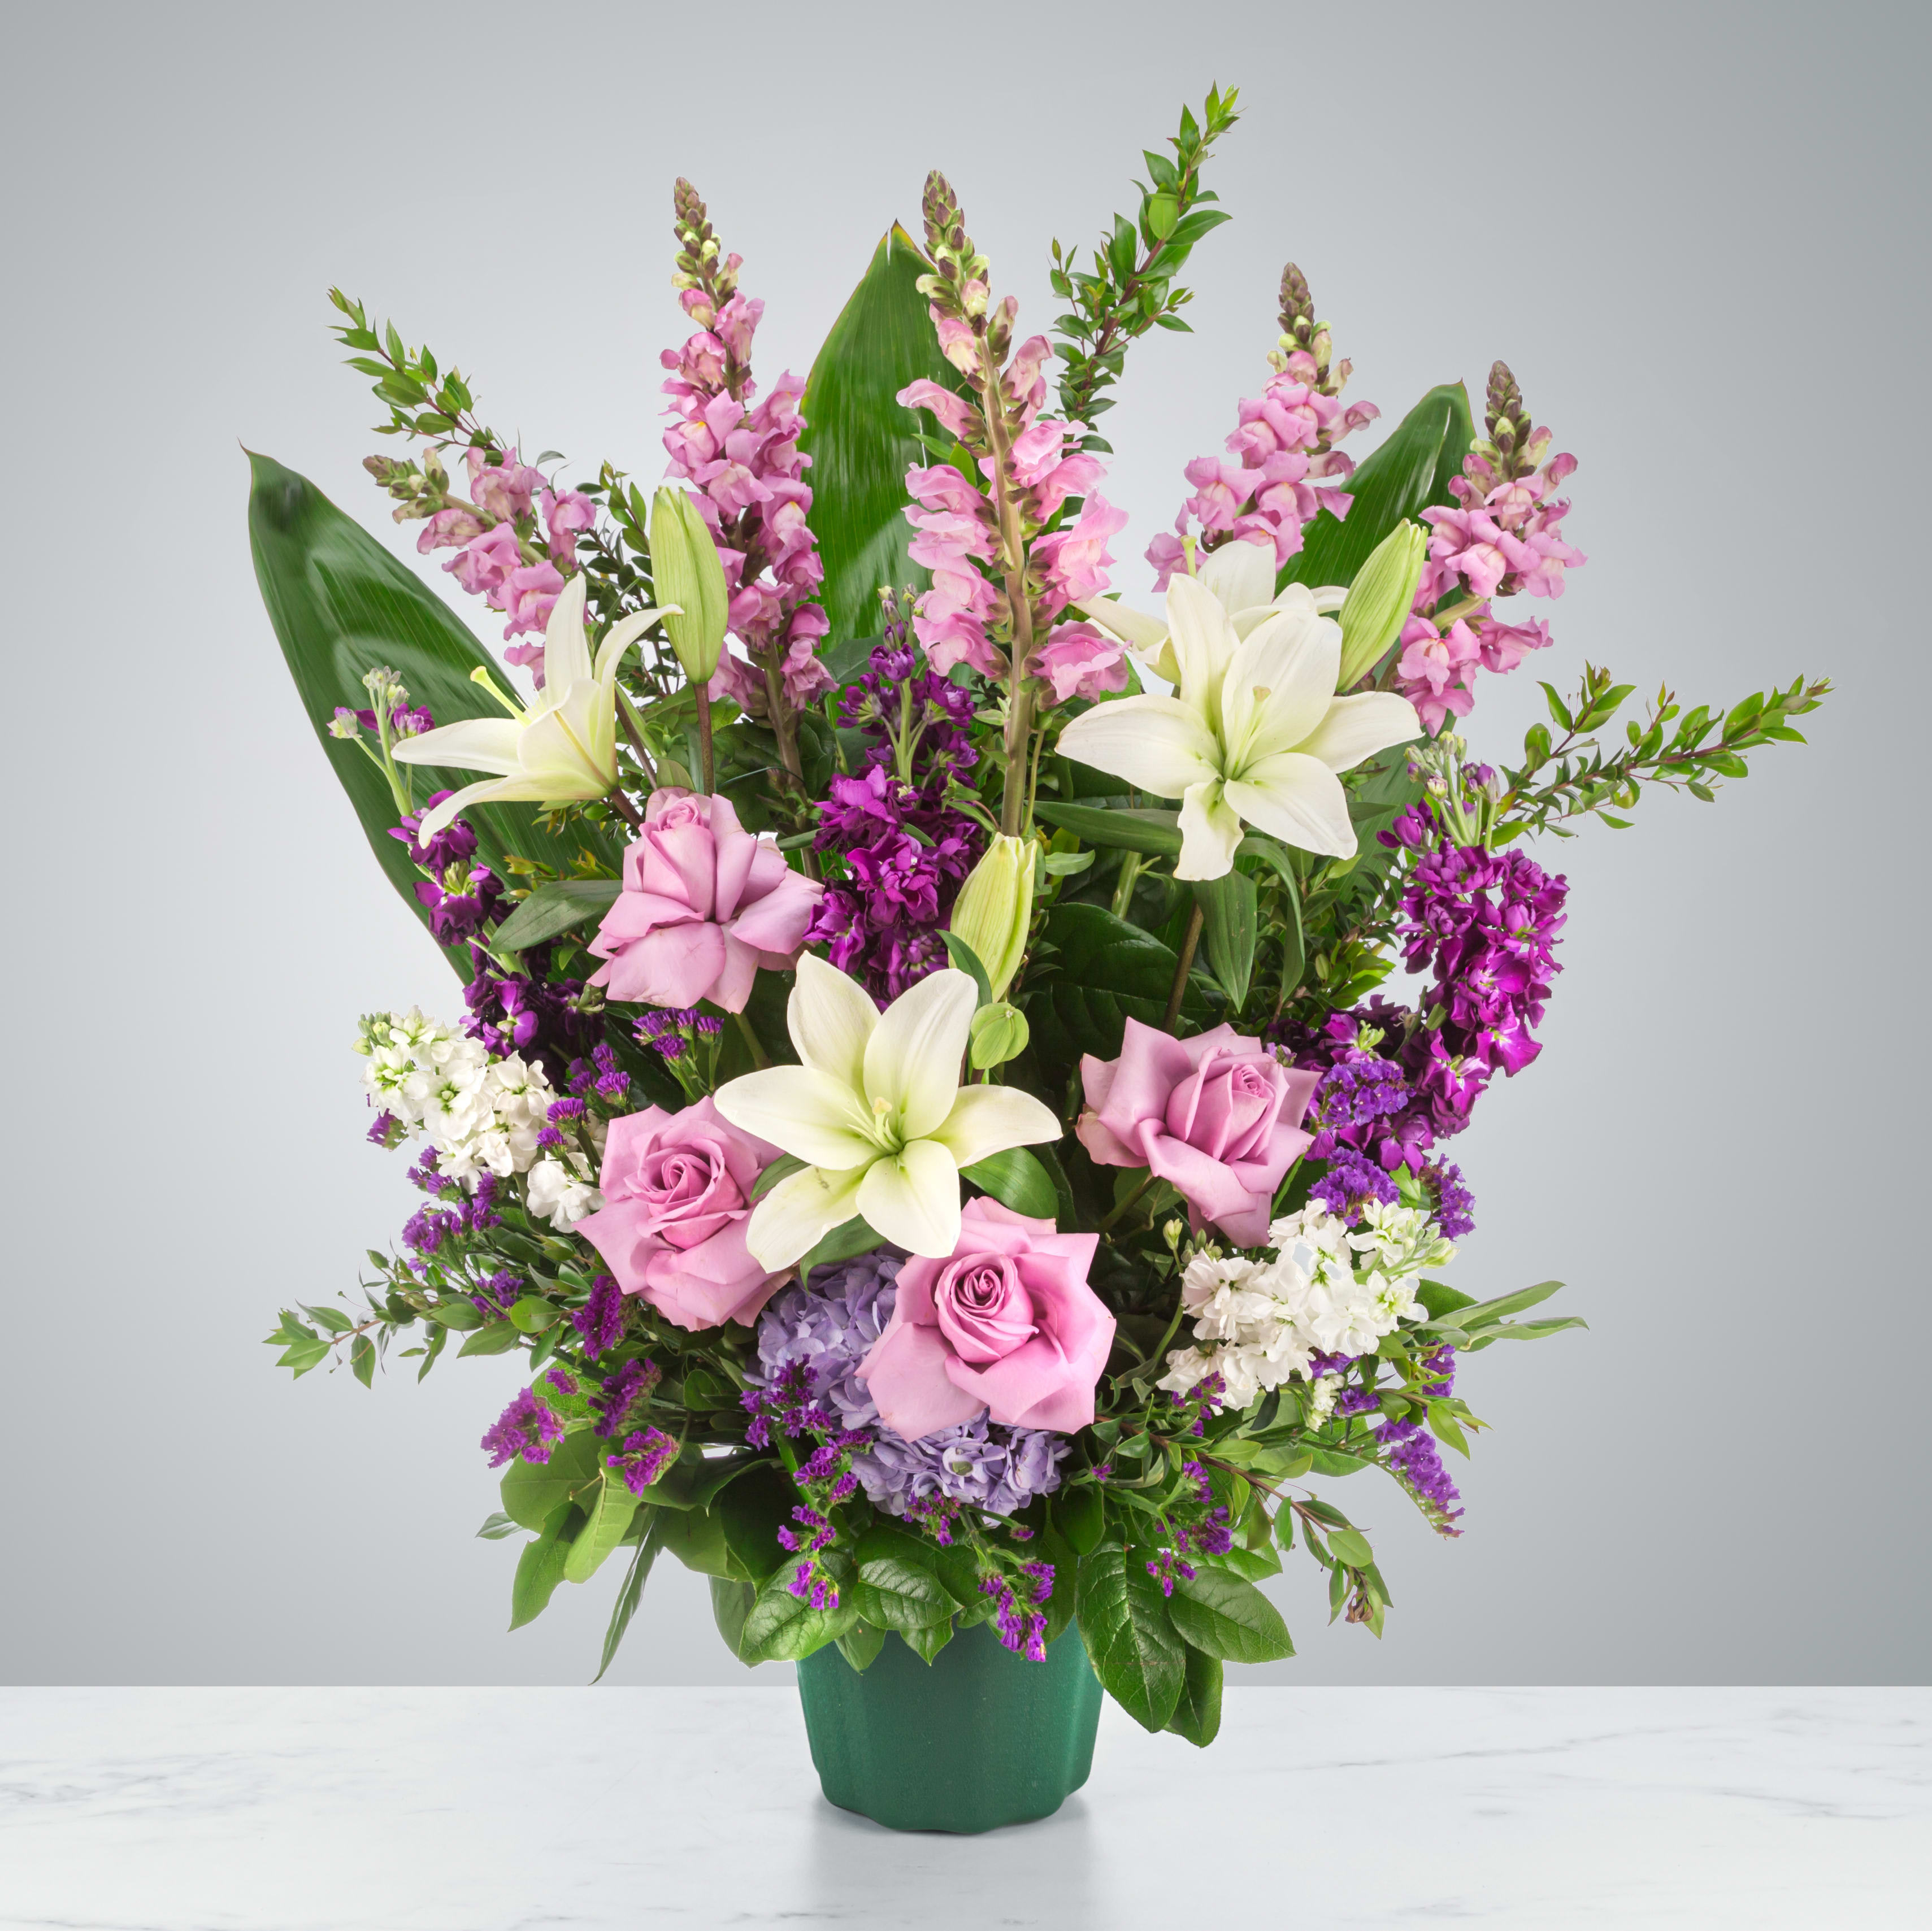 Purple Blessing - A purple and white sympathy basket featuring snapdragons, roses, lilies, and stock. This fragrant arrangement works for every type of funeral ceremony.